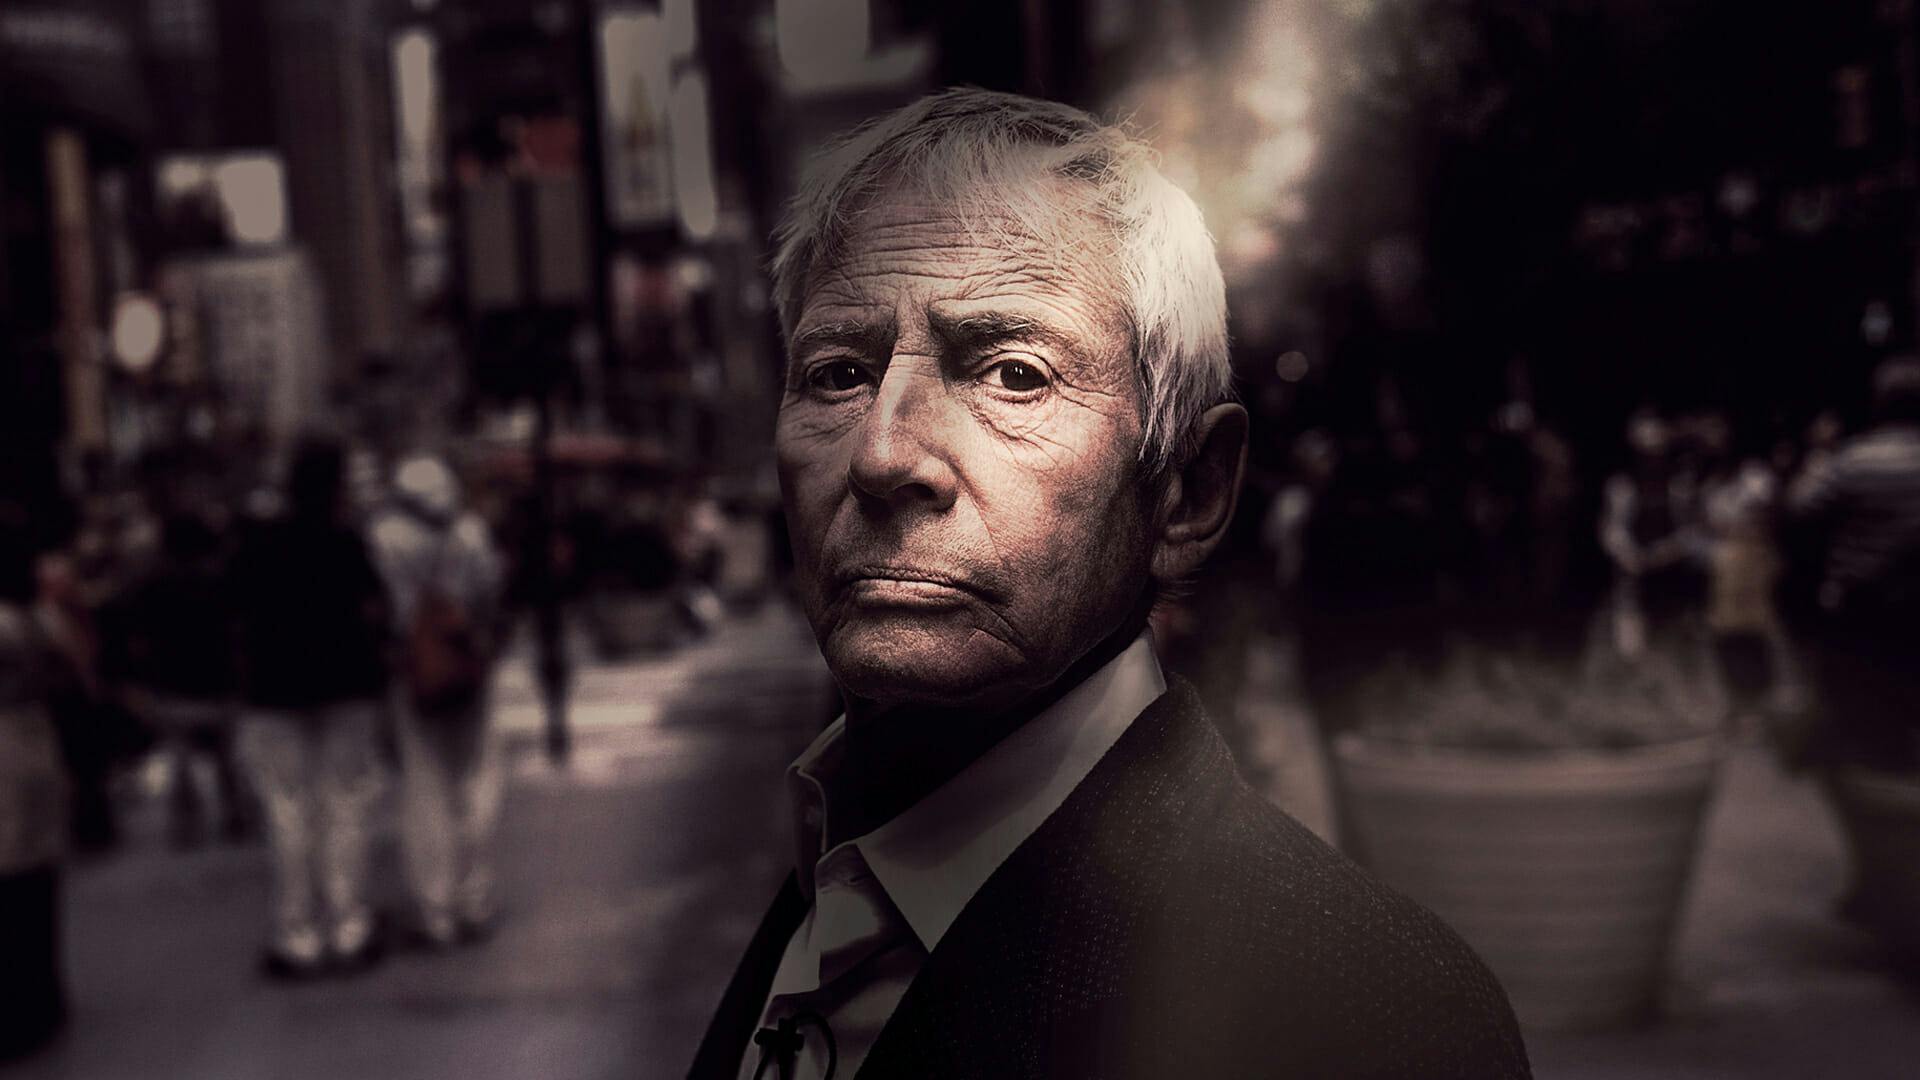 HBO docuseries : The Jinx: The Life and Deaths of Robert Durst